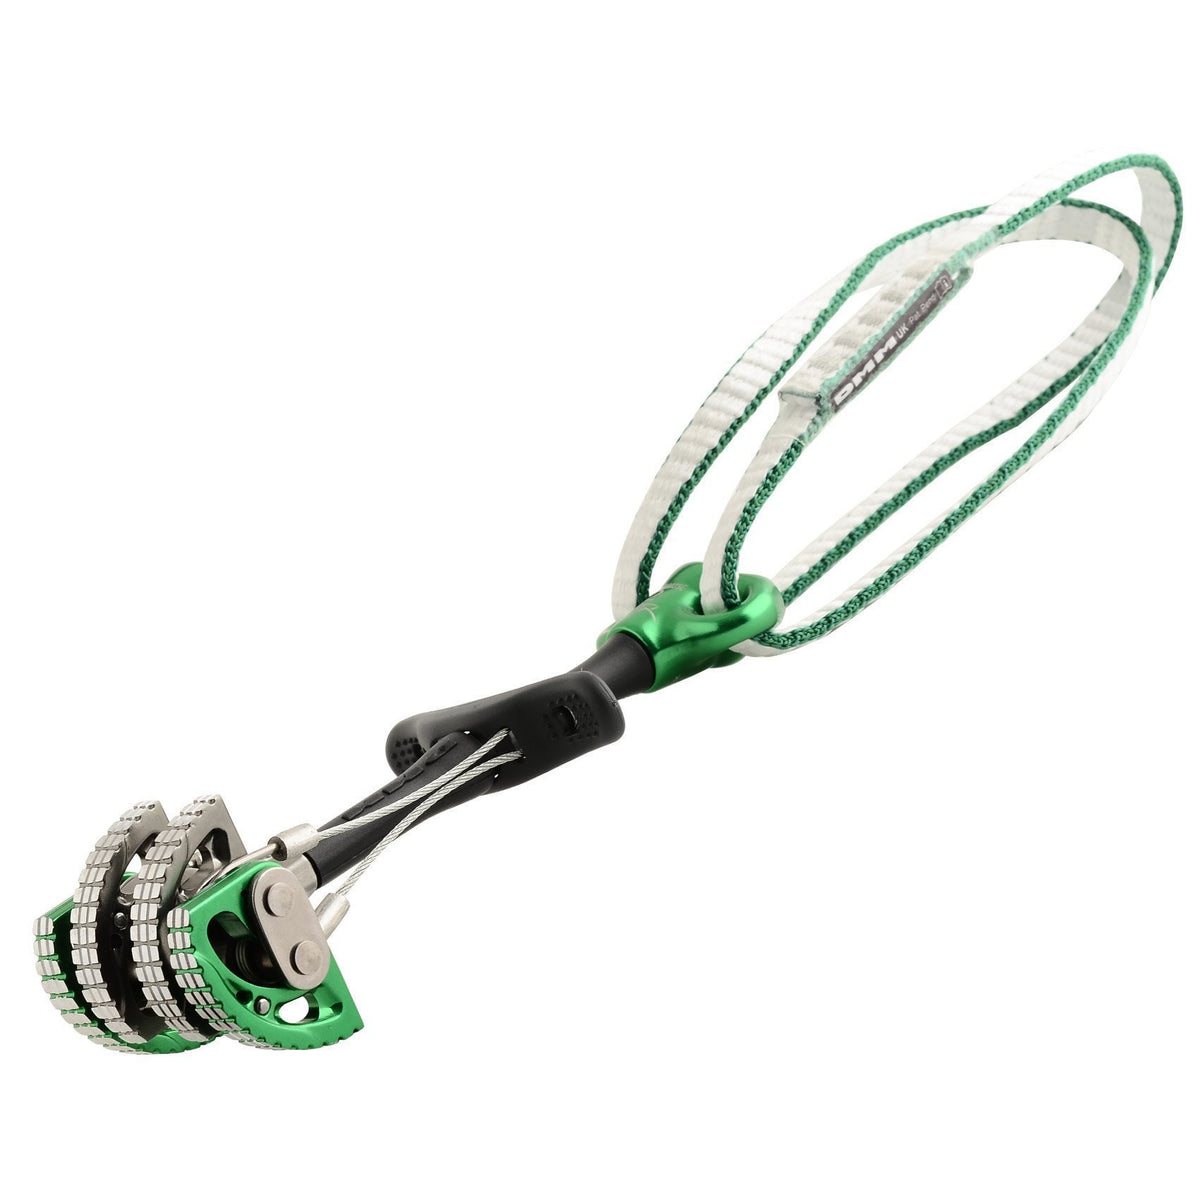 DMM Dragon Cam, Size 2 in green colour